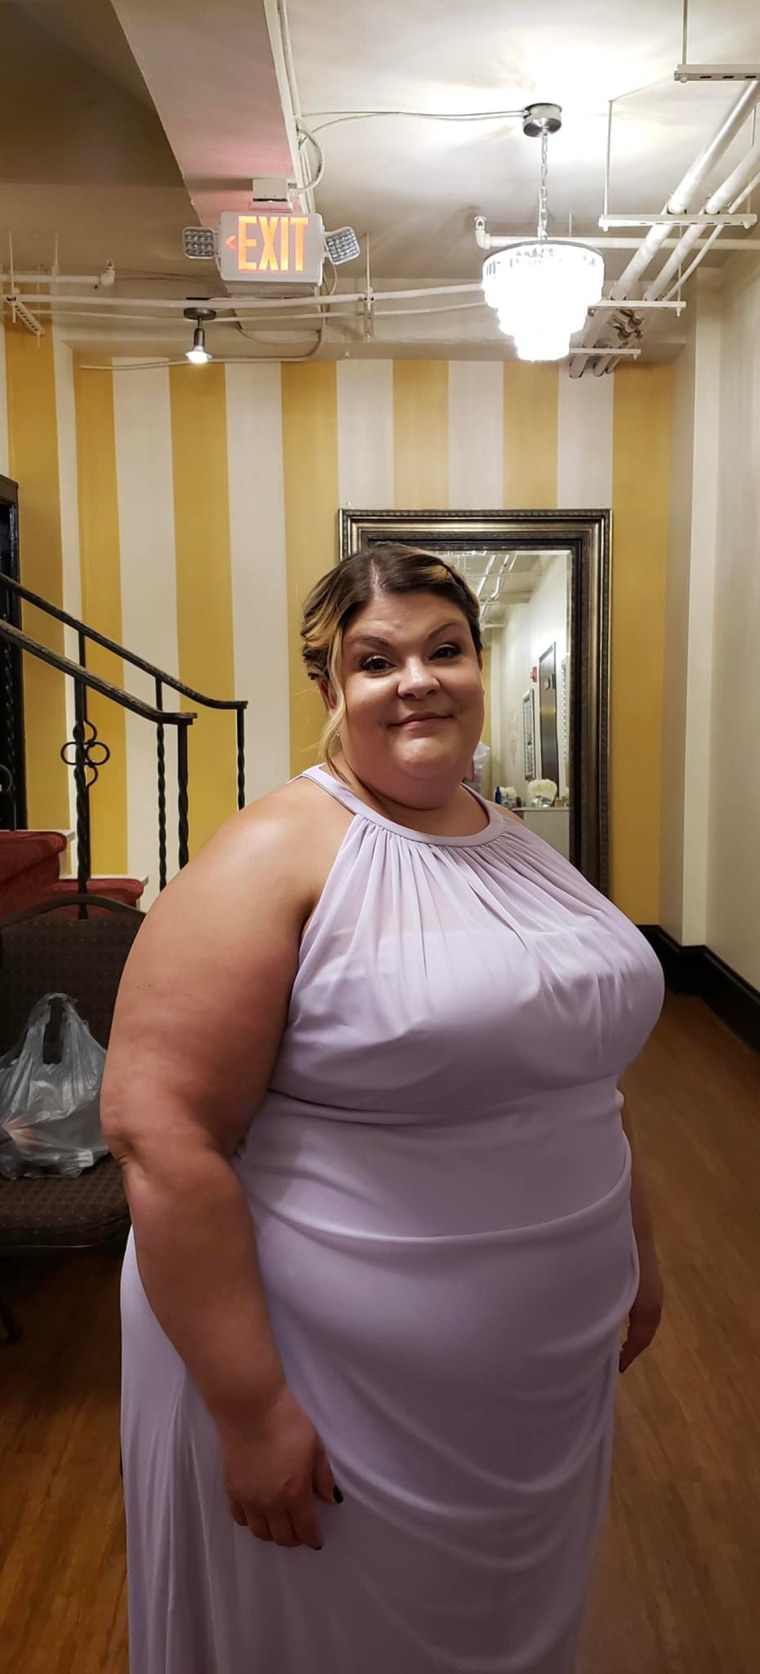 Keri North was motivated to lose weight by her family.